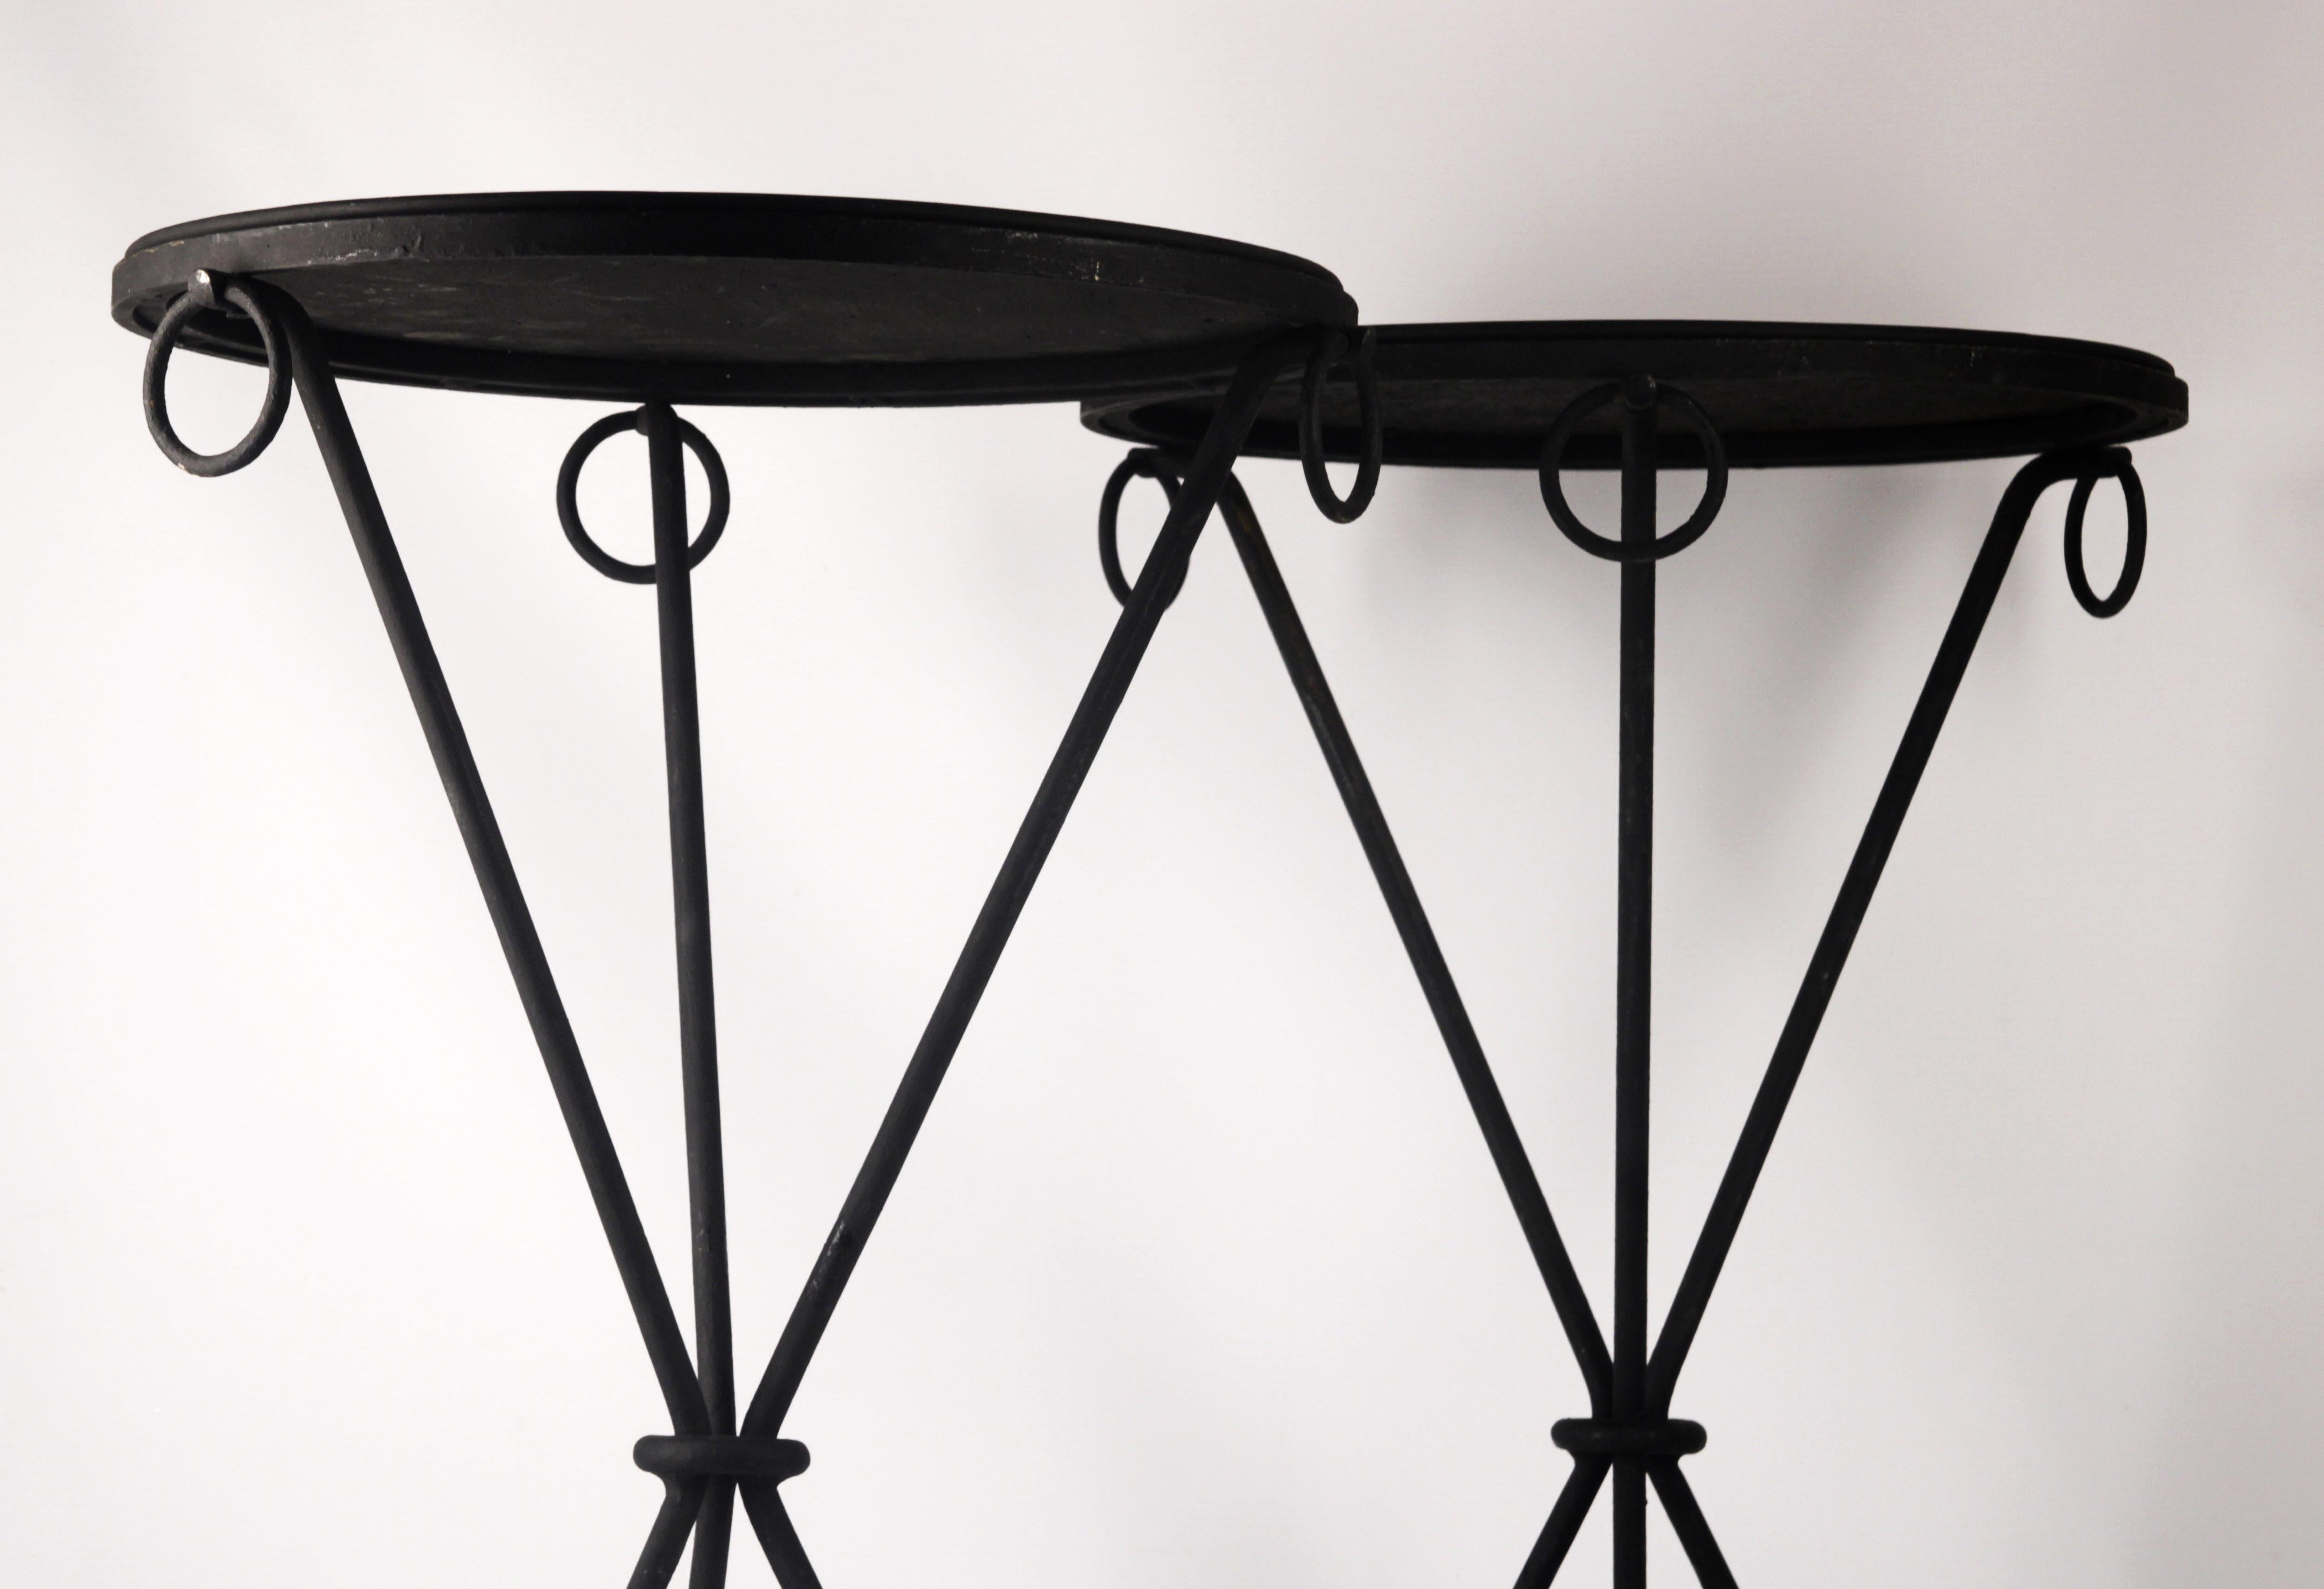 Argentine Pair of Mid-20th Century Iron Guéridons Tables by Jean Michel-Frank for Comte